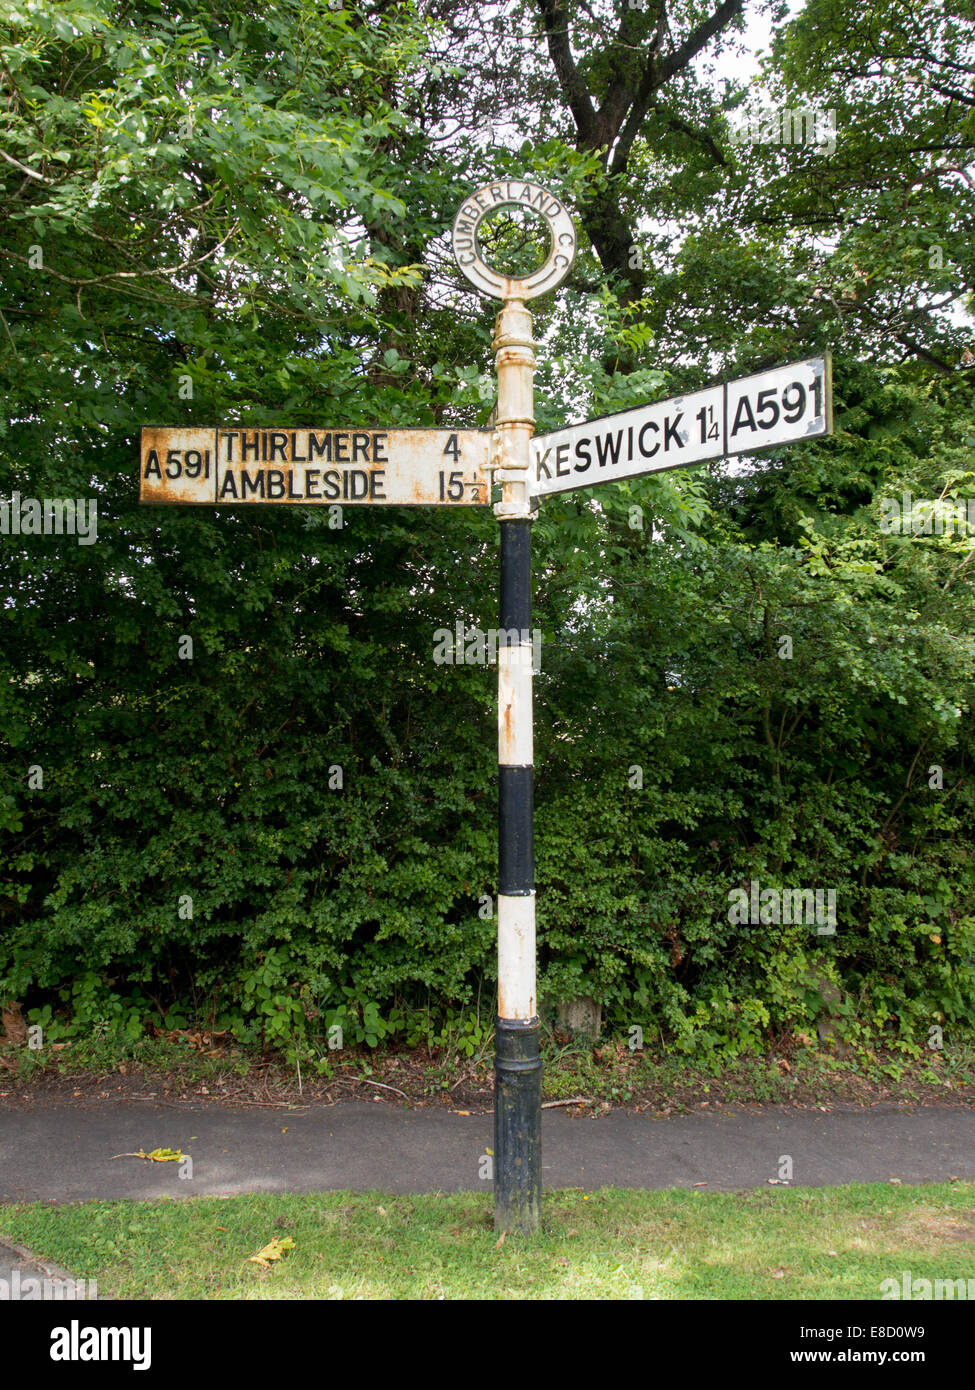 An old signpost in the Lake District with directions to Keswick, Thirlmere and Ambleside Stock Photo